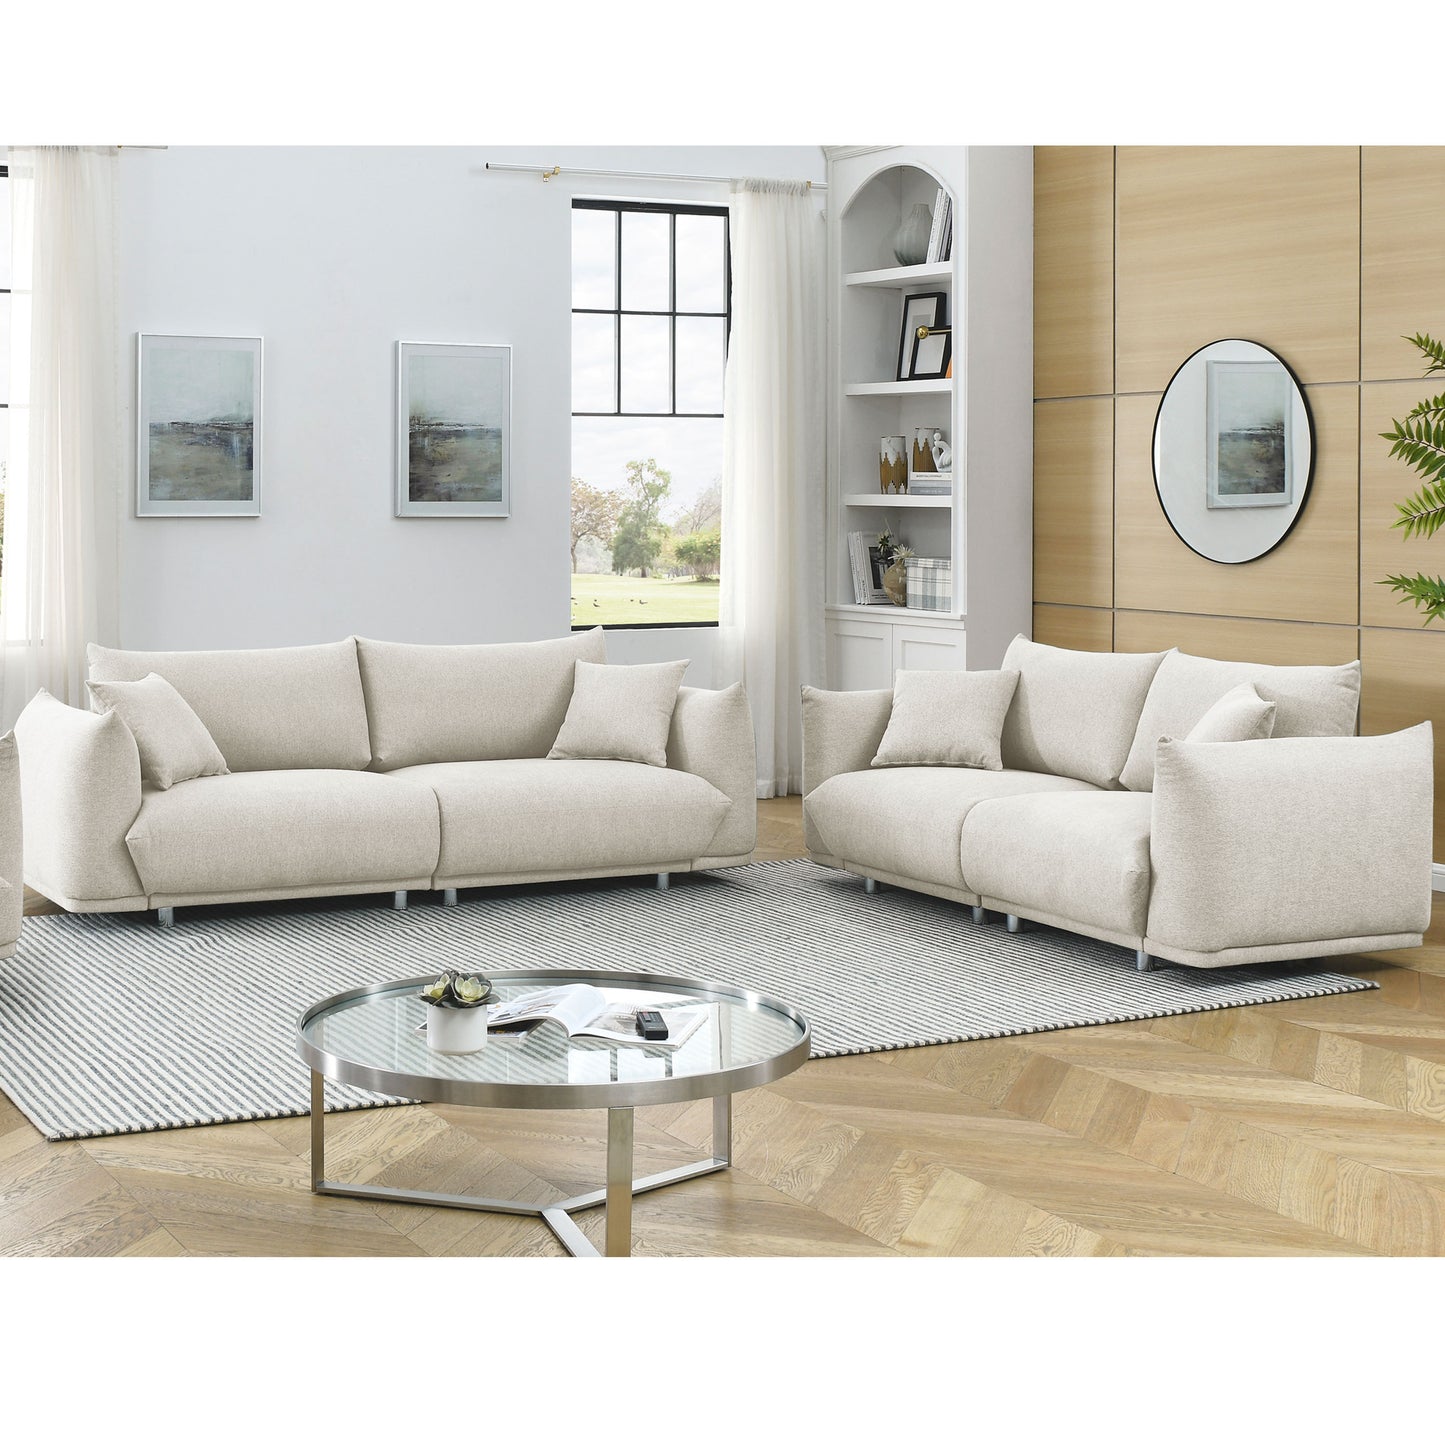 3-seater + 2-seater combination sofa Modern Couch for Living Room Sofa,Solid Wood Frame and Stable Metal Legs, 4 Pillows, Sofa Furniture for Apartment